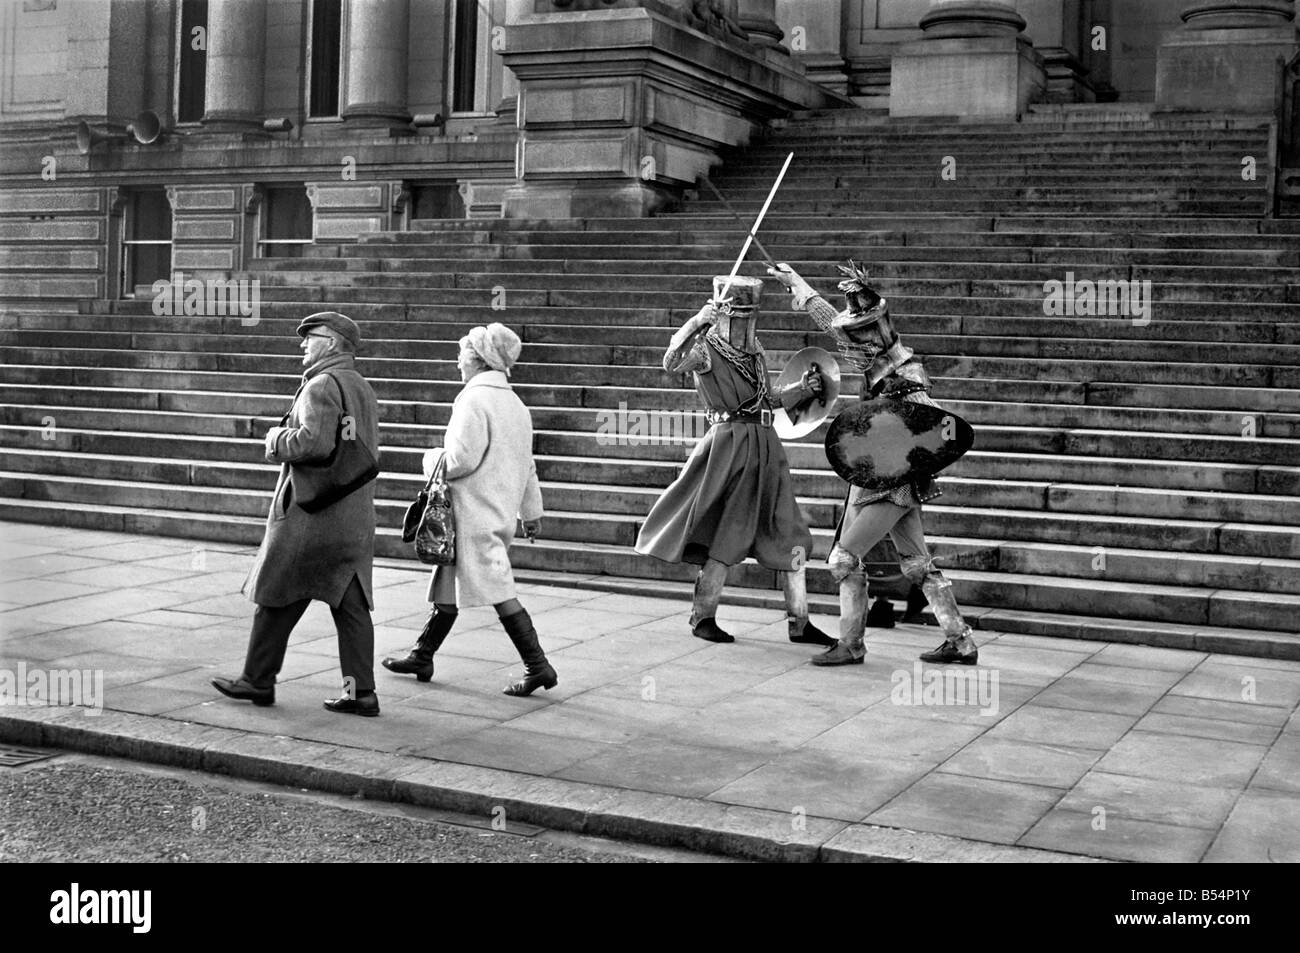 Shoppers hurry past the Town Hall steps as a couple of medieval knights are locked in combat in Bolton. The battle was being filmed by the Bolton Octagan Theatre Company. December 1969 Z11749 Stock Photo